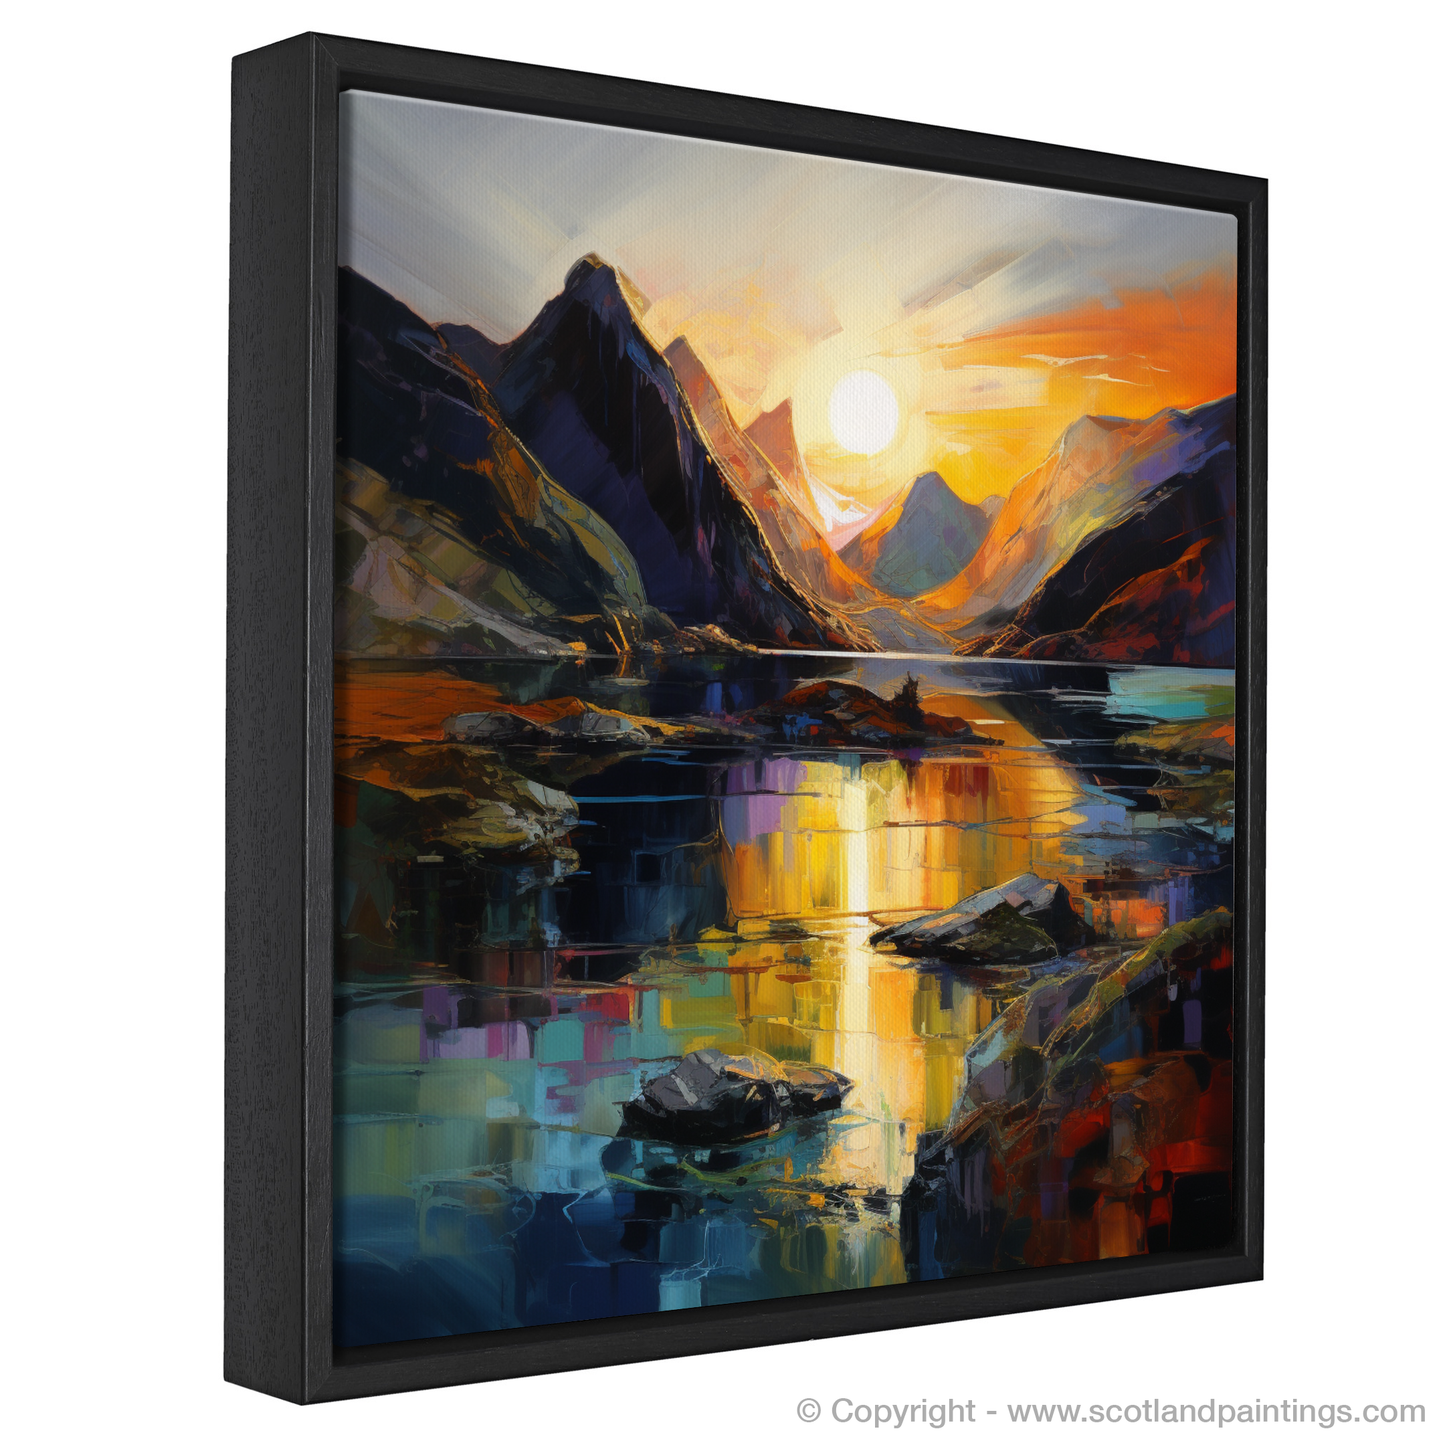 Painting and Art Print of Loch Coruisk at sunset entitled "Sunset Sonata over Loch Coruisk".